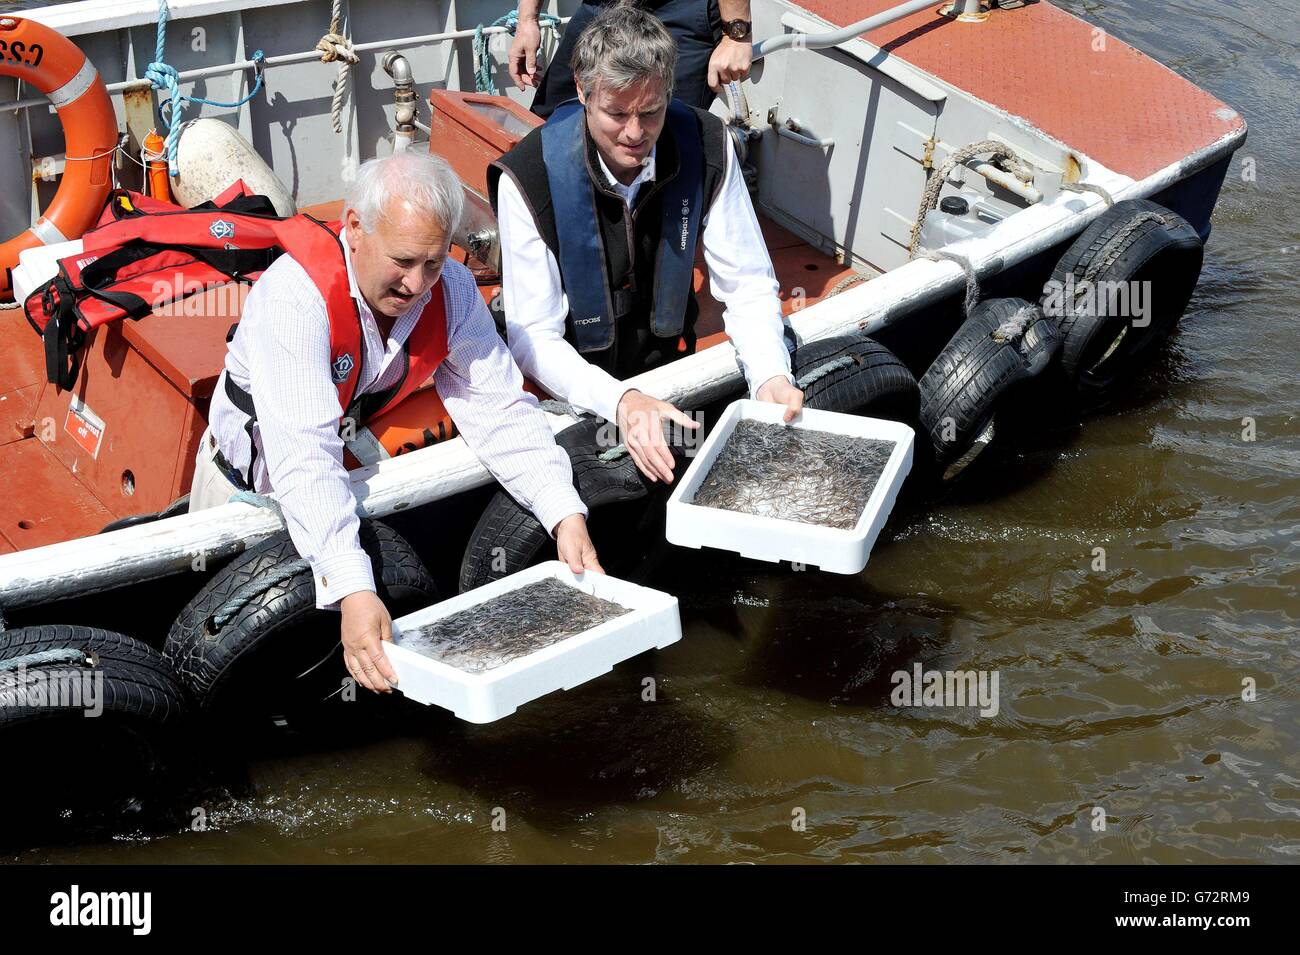 Zac Goldsmith MP (right) joins Andrew Kerr Chairman of the Sustainable Eel Group as they release 10,000 juvenile eels into the River Thames from a boat in front of the Houses of Parliament, central London, during a photocall to publicise a conservation mission to relocate more than 90 million critically endangered European eels. Stock Photo